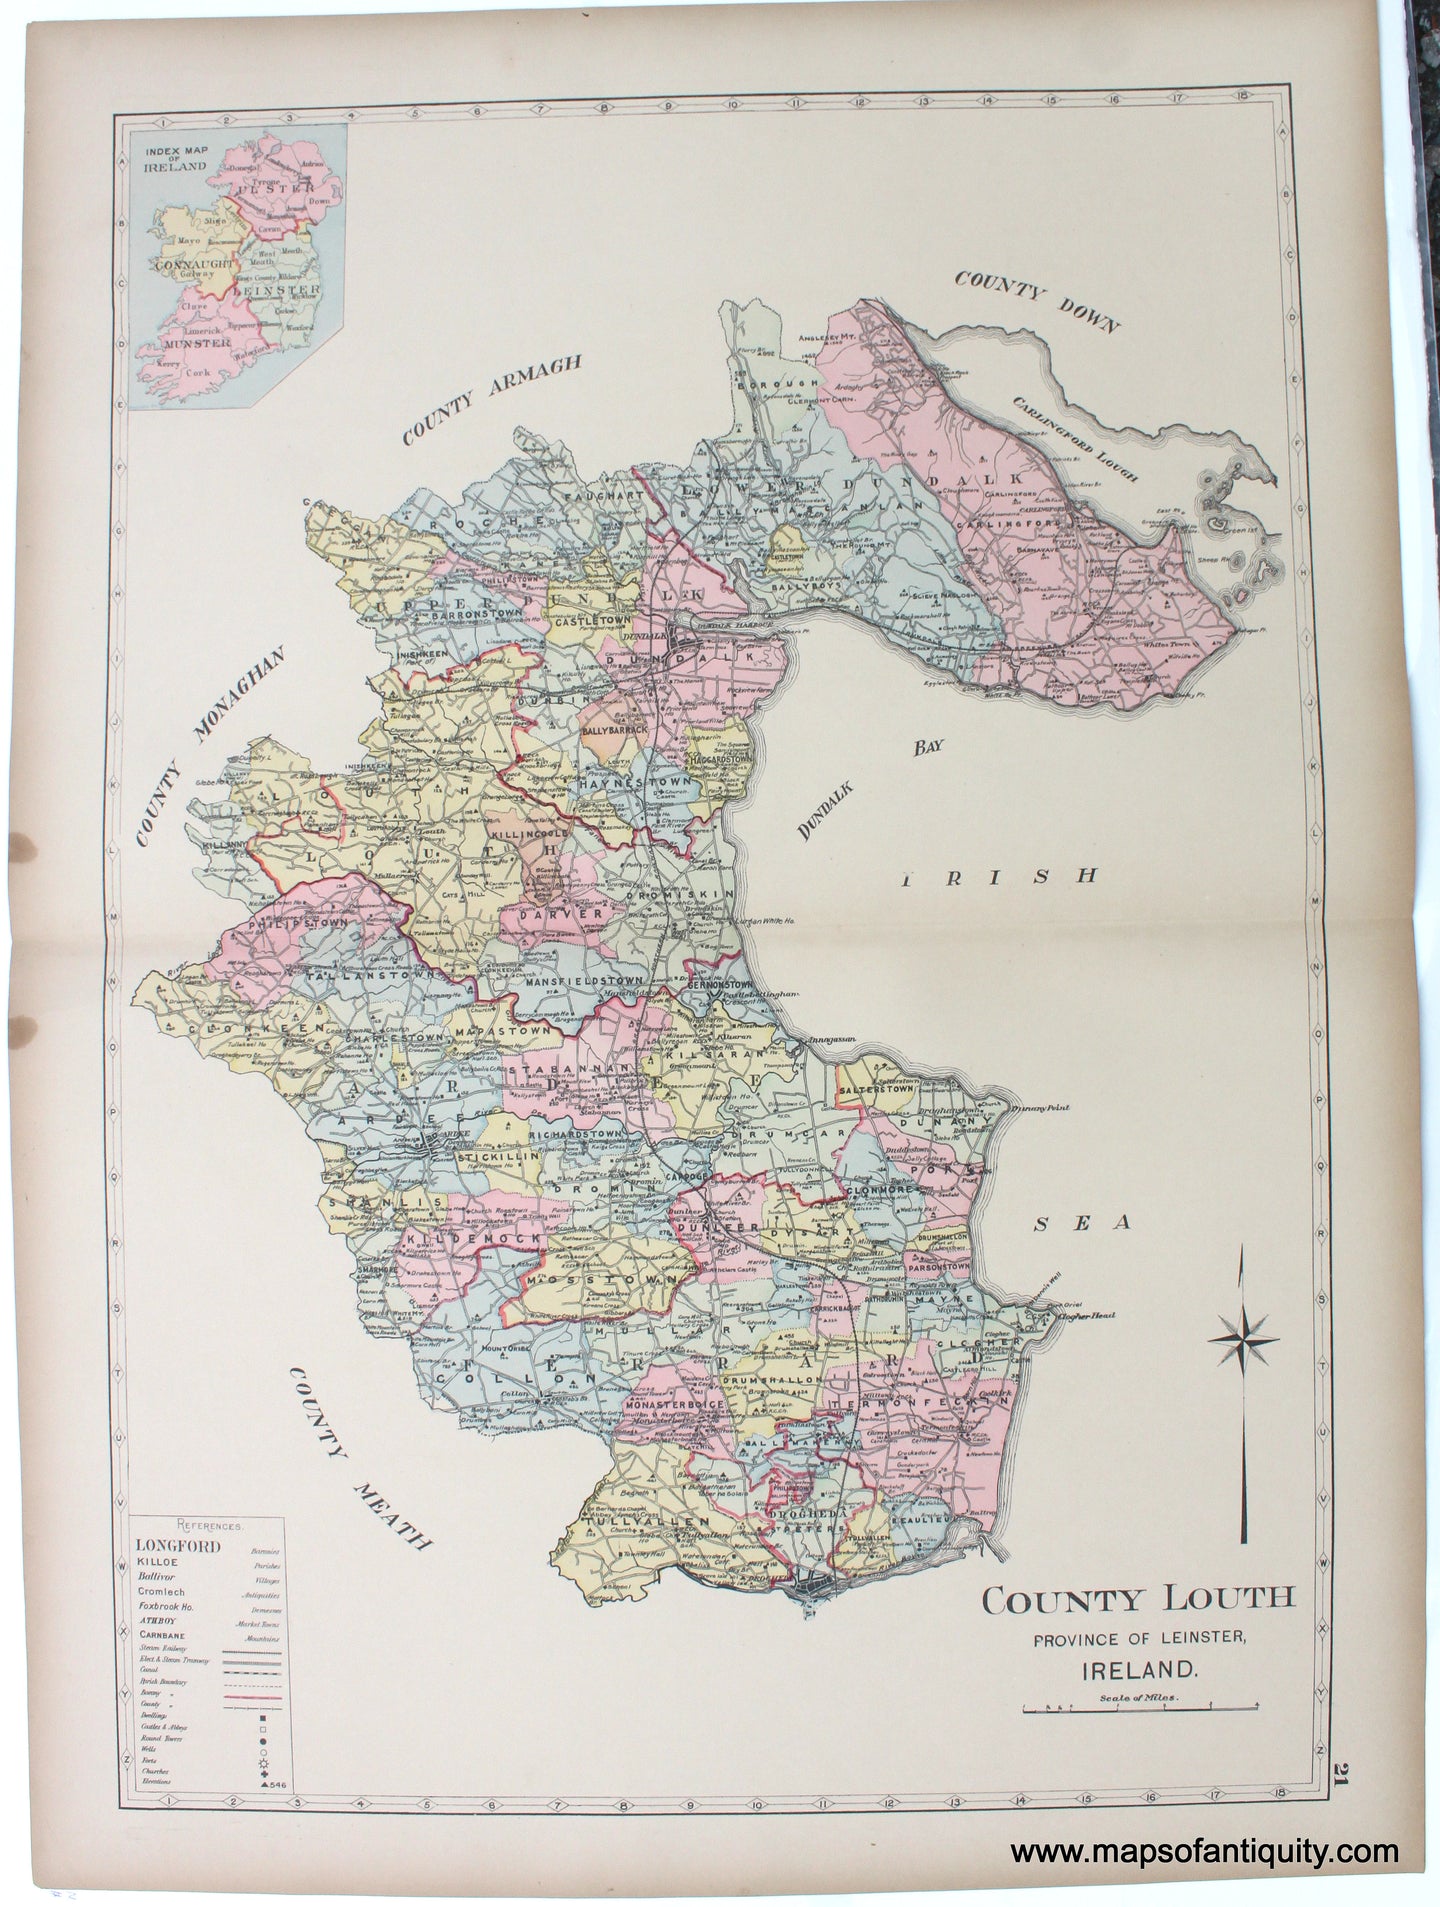 1901 - County Louth, Province of Leinster, Ireland. - Antique Map